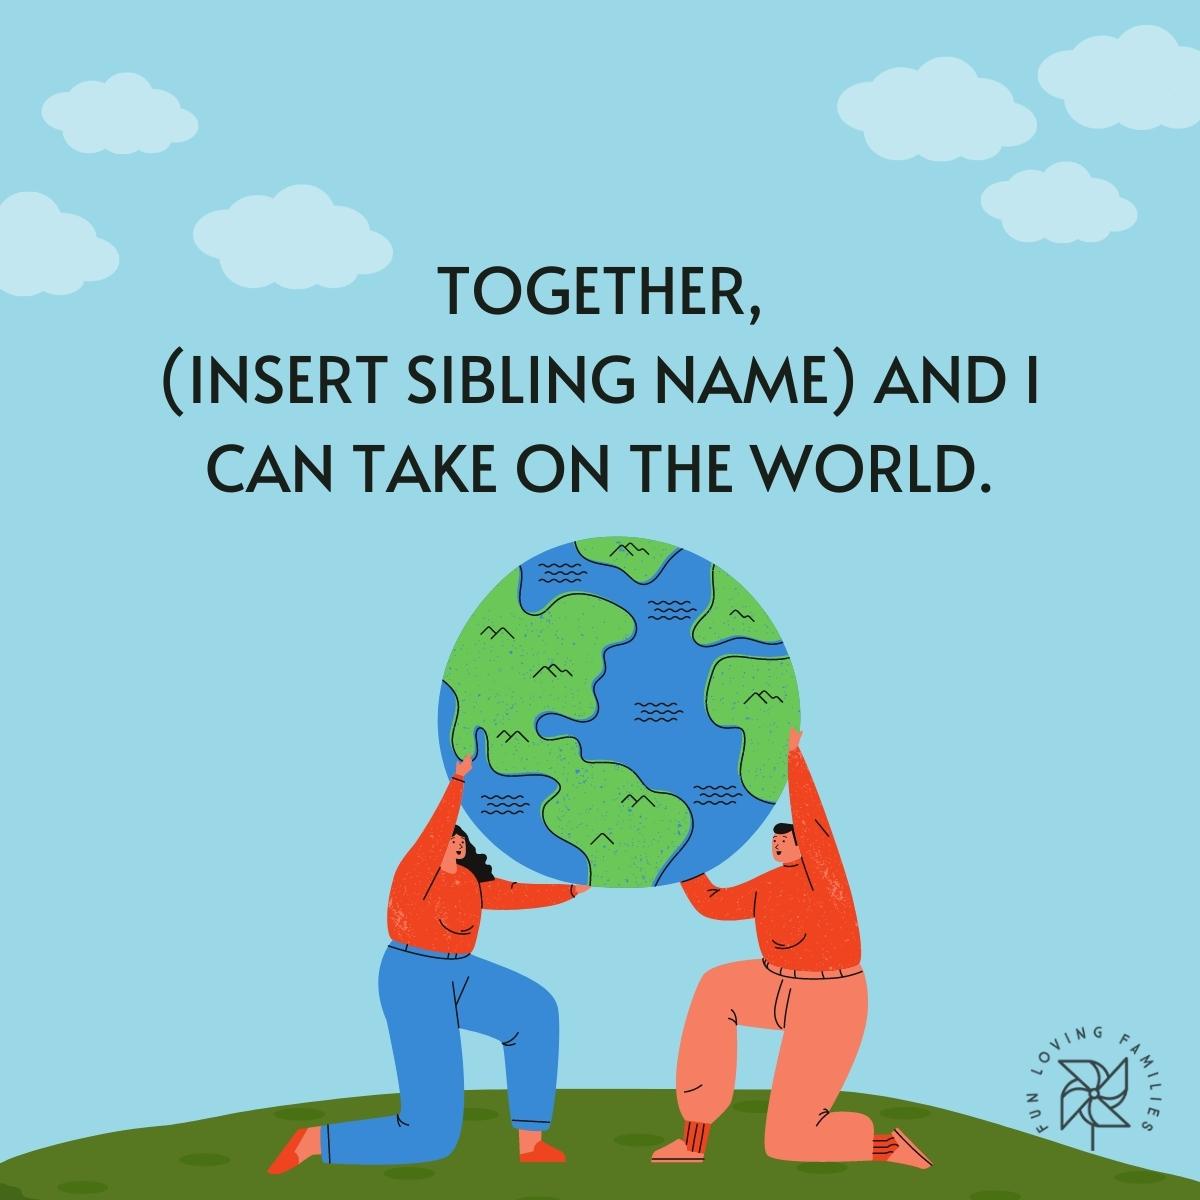 Together, (insert sibling name) and I can take on the world affirmation